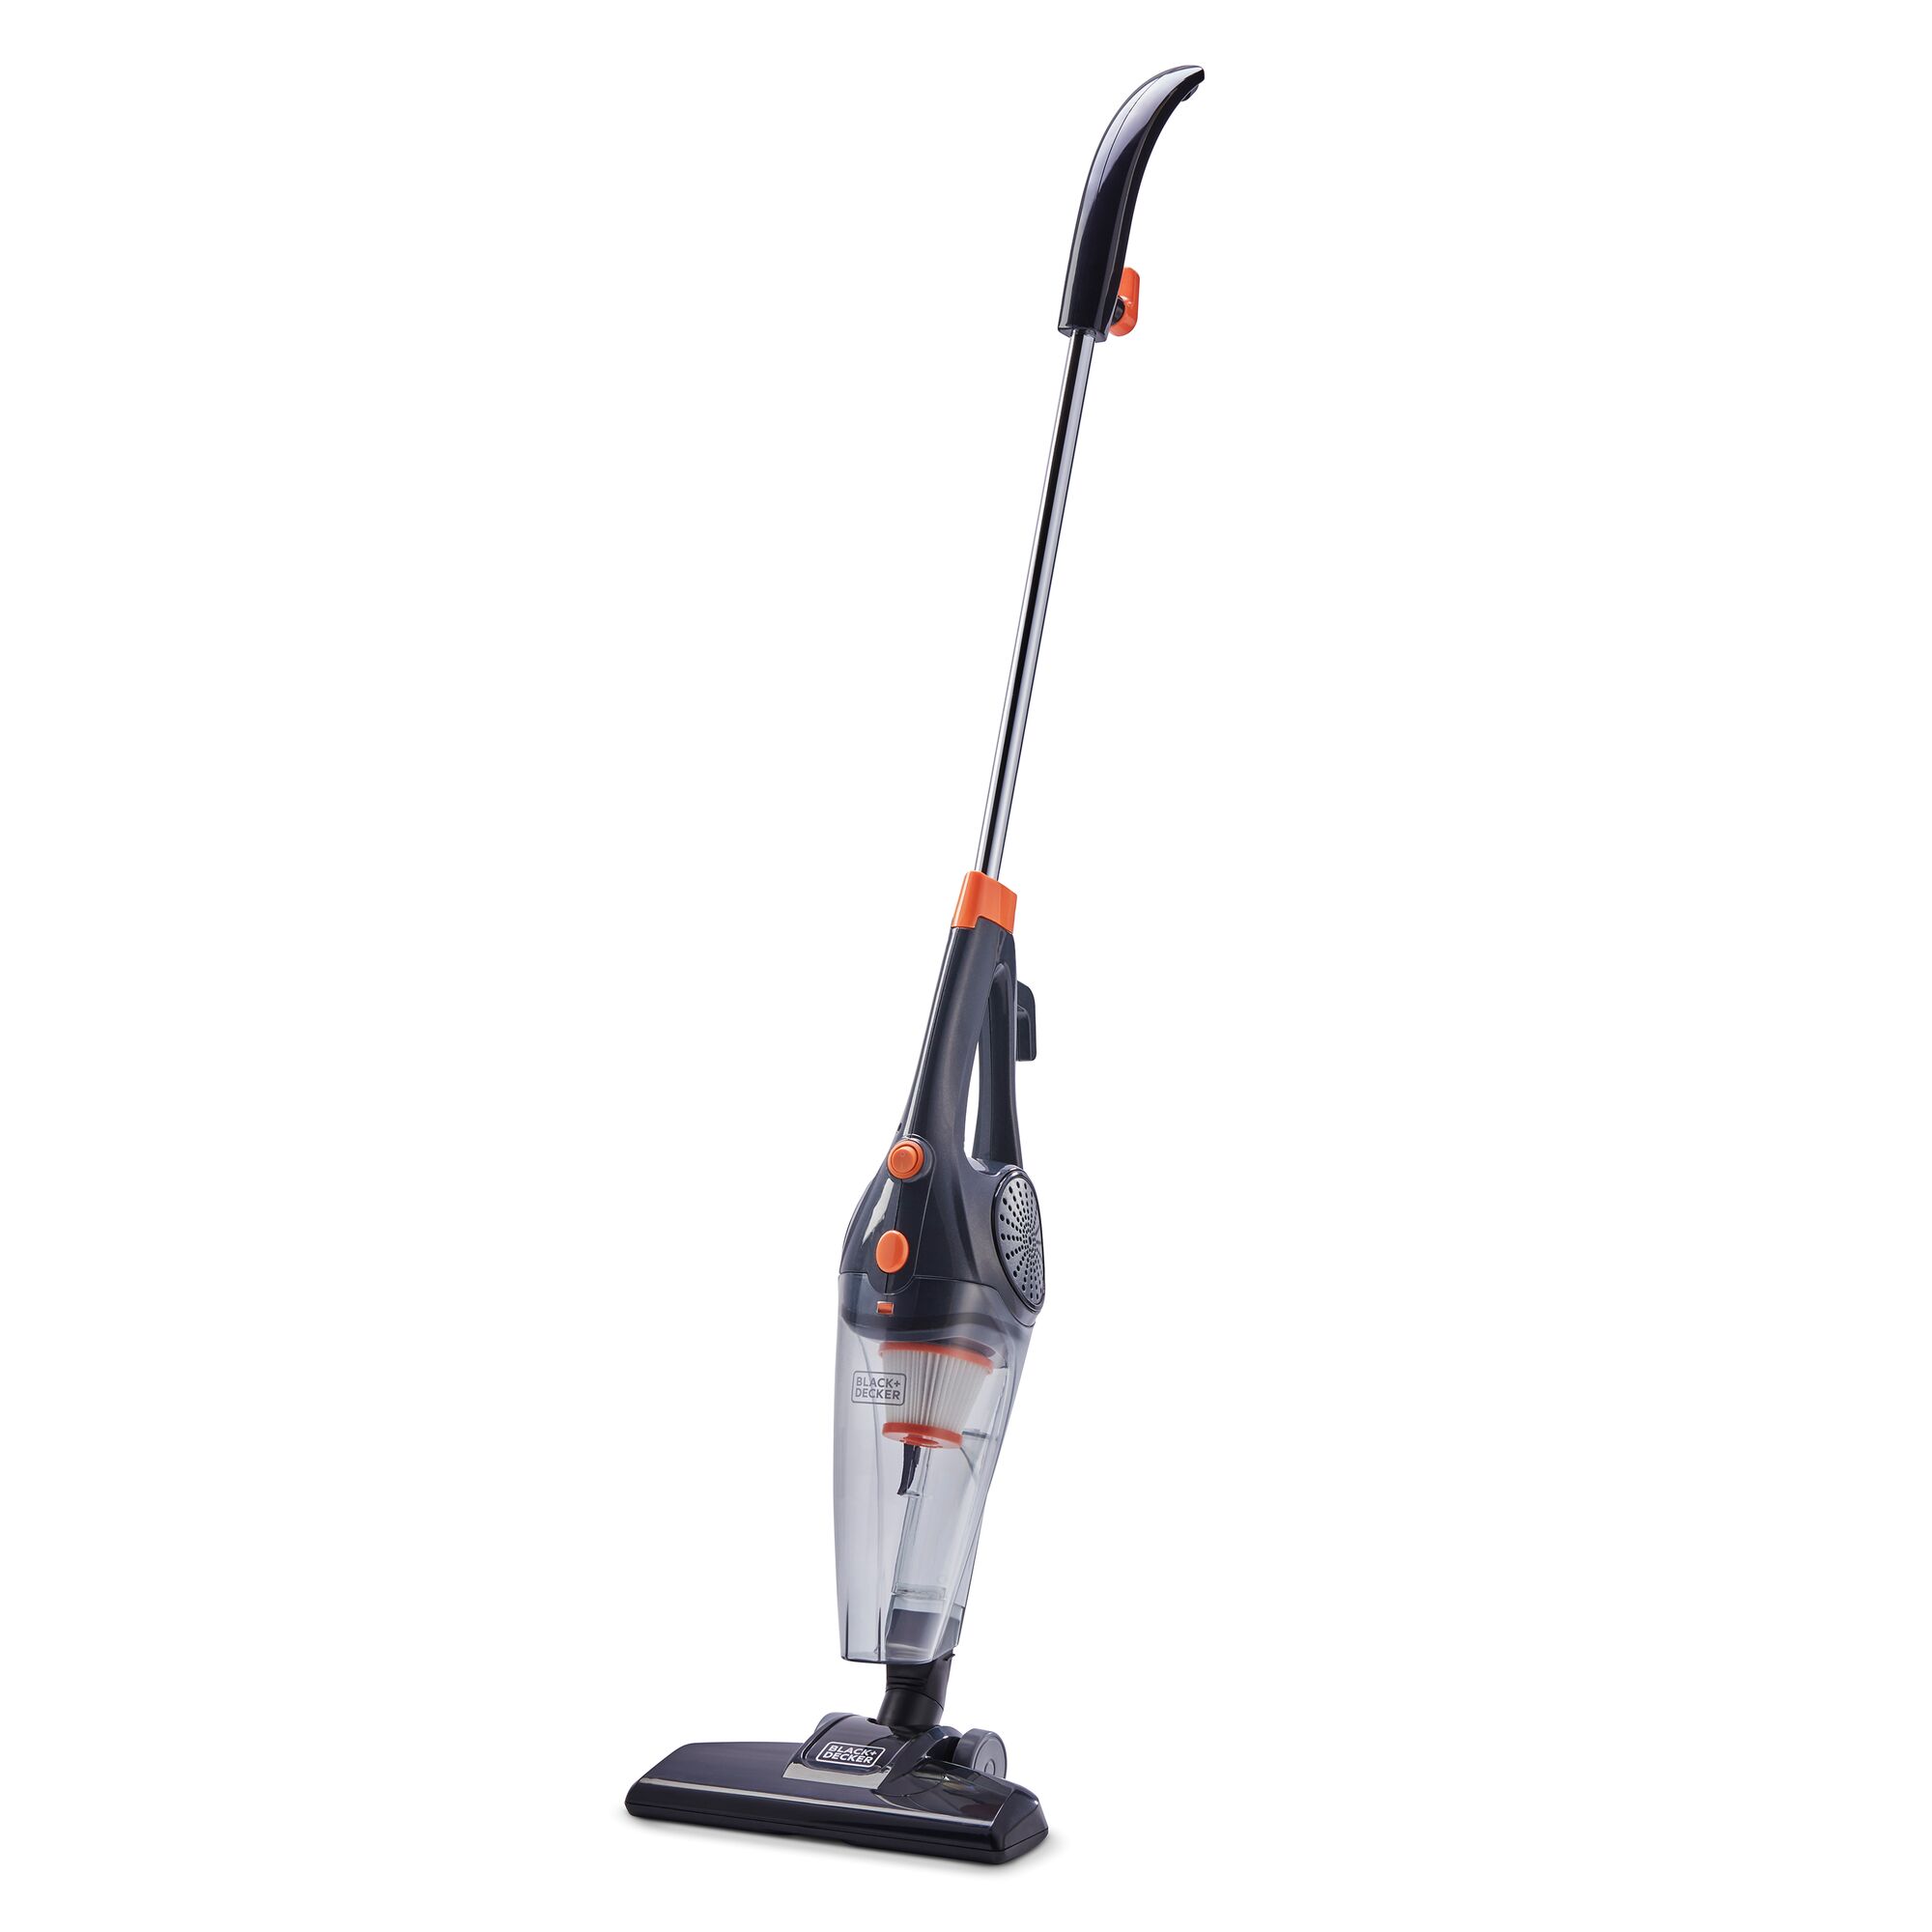 3In1 Upright Stick And Handheld Vacuum Cleaner